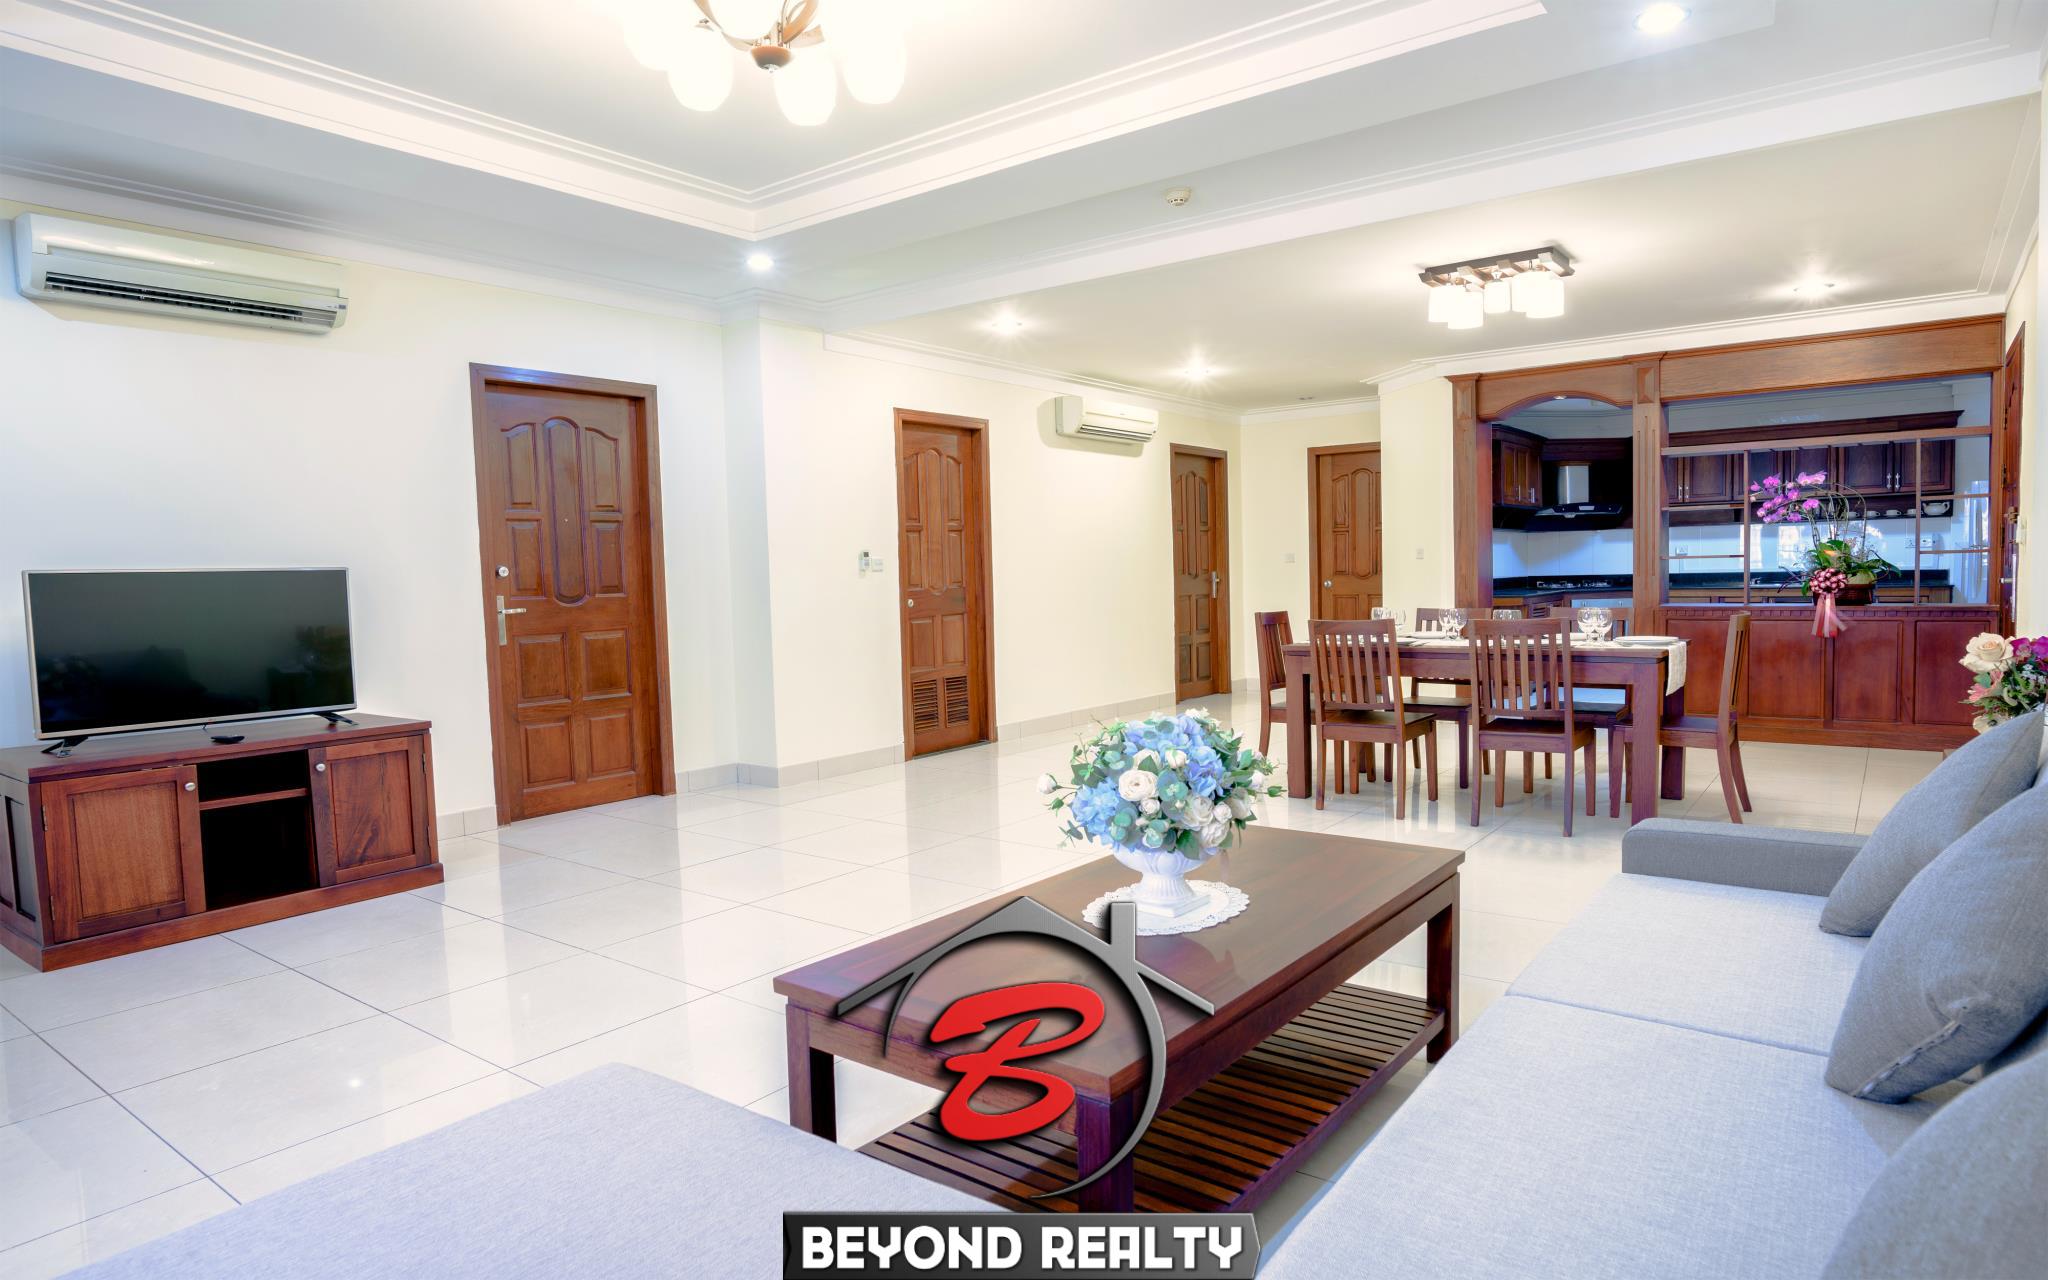 the living room of the 1-bedroom luxury serviced apartment for rent in BKK1 Phnom Penh Cambodia